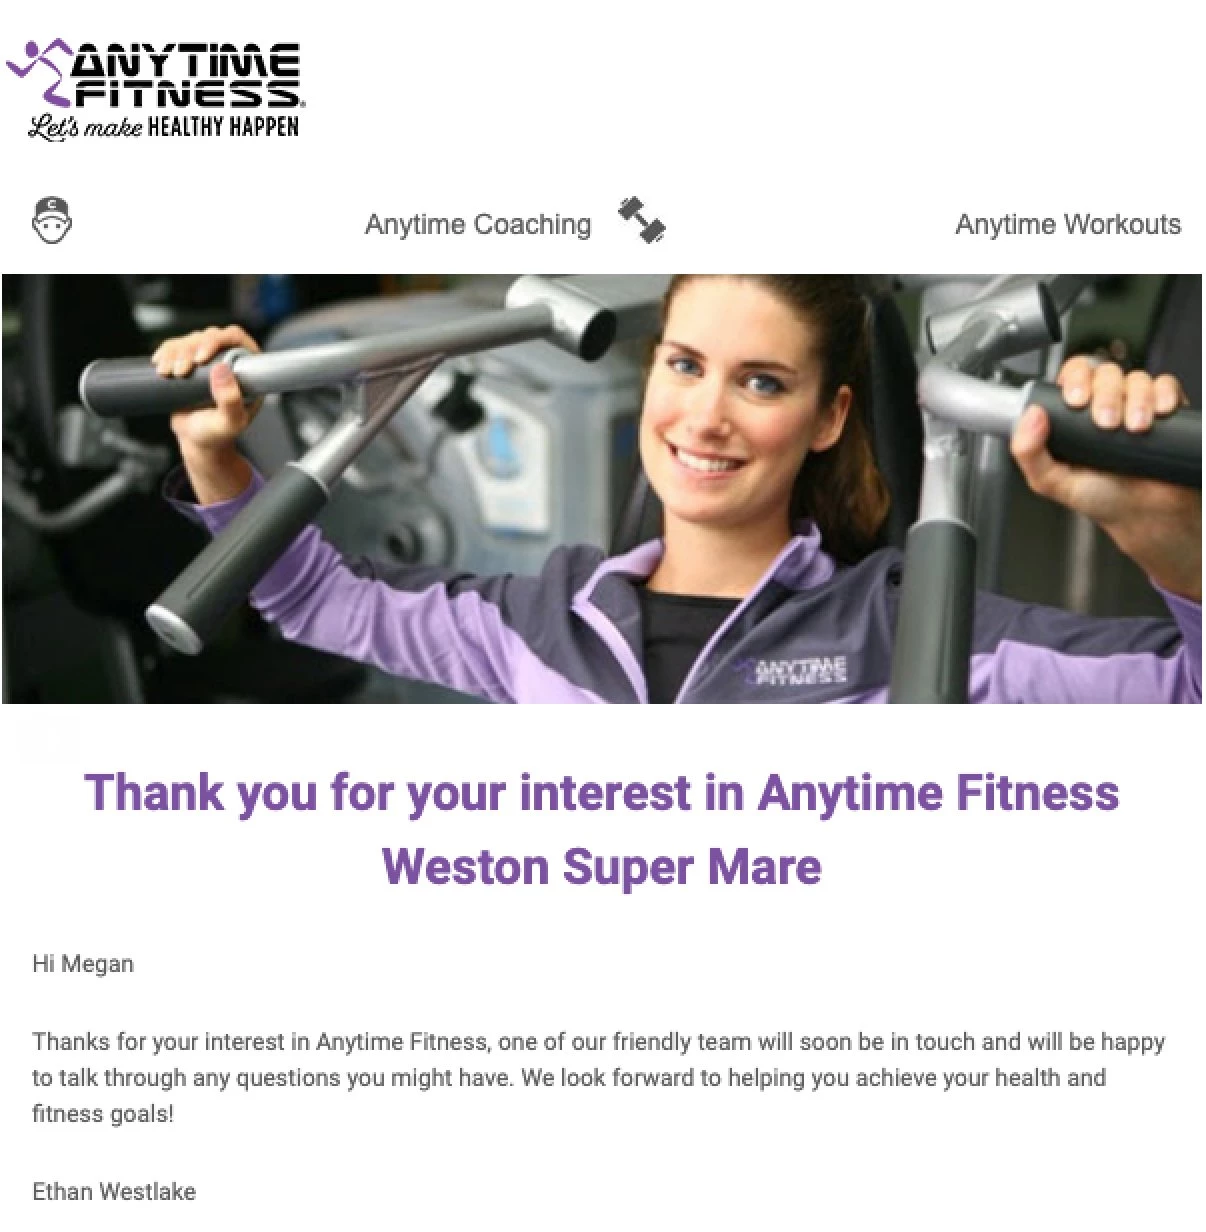 Anytime Fitness newsletter example purple letters